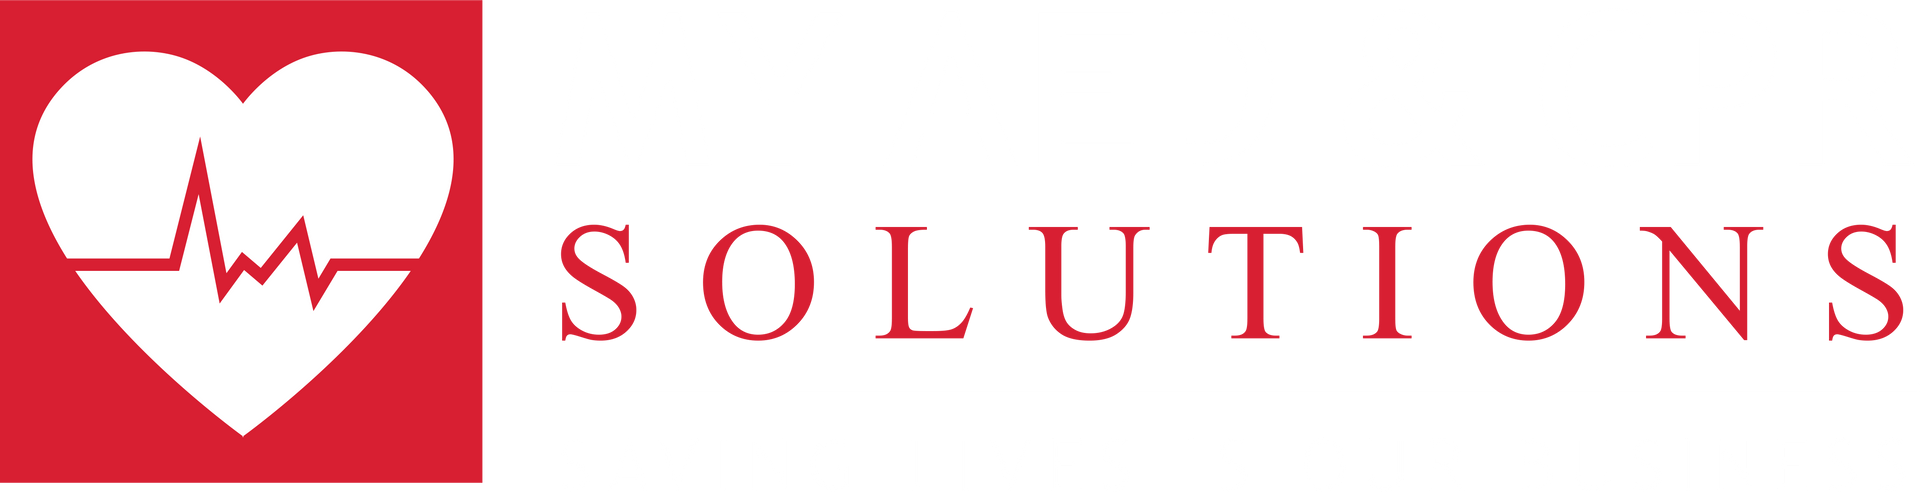 MY AED & CPR SOLUTIONS